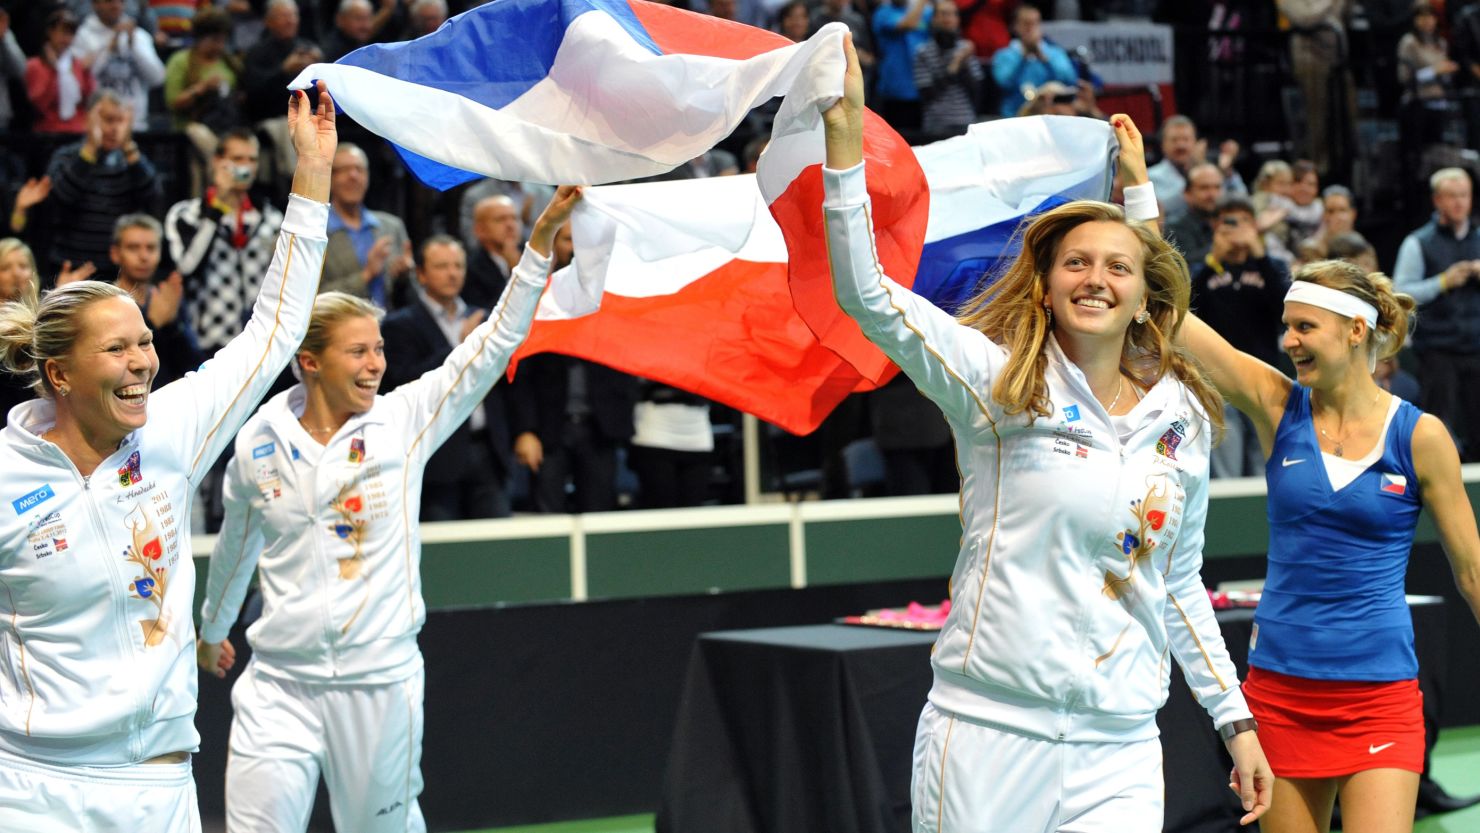 Czech Fed Cup members (from left) Lucie Hradecka, Andrea Hlavackova, Petra Kvitova and Lucie Safarova celebrate Sunday's victory on their home courts in Prague.